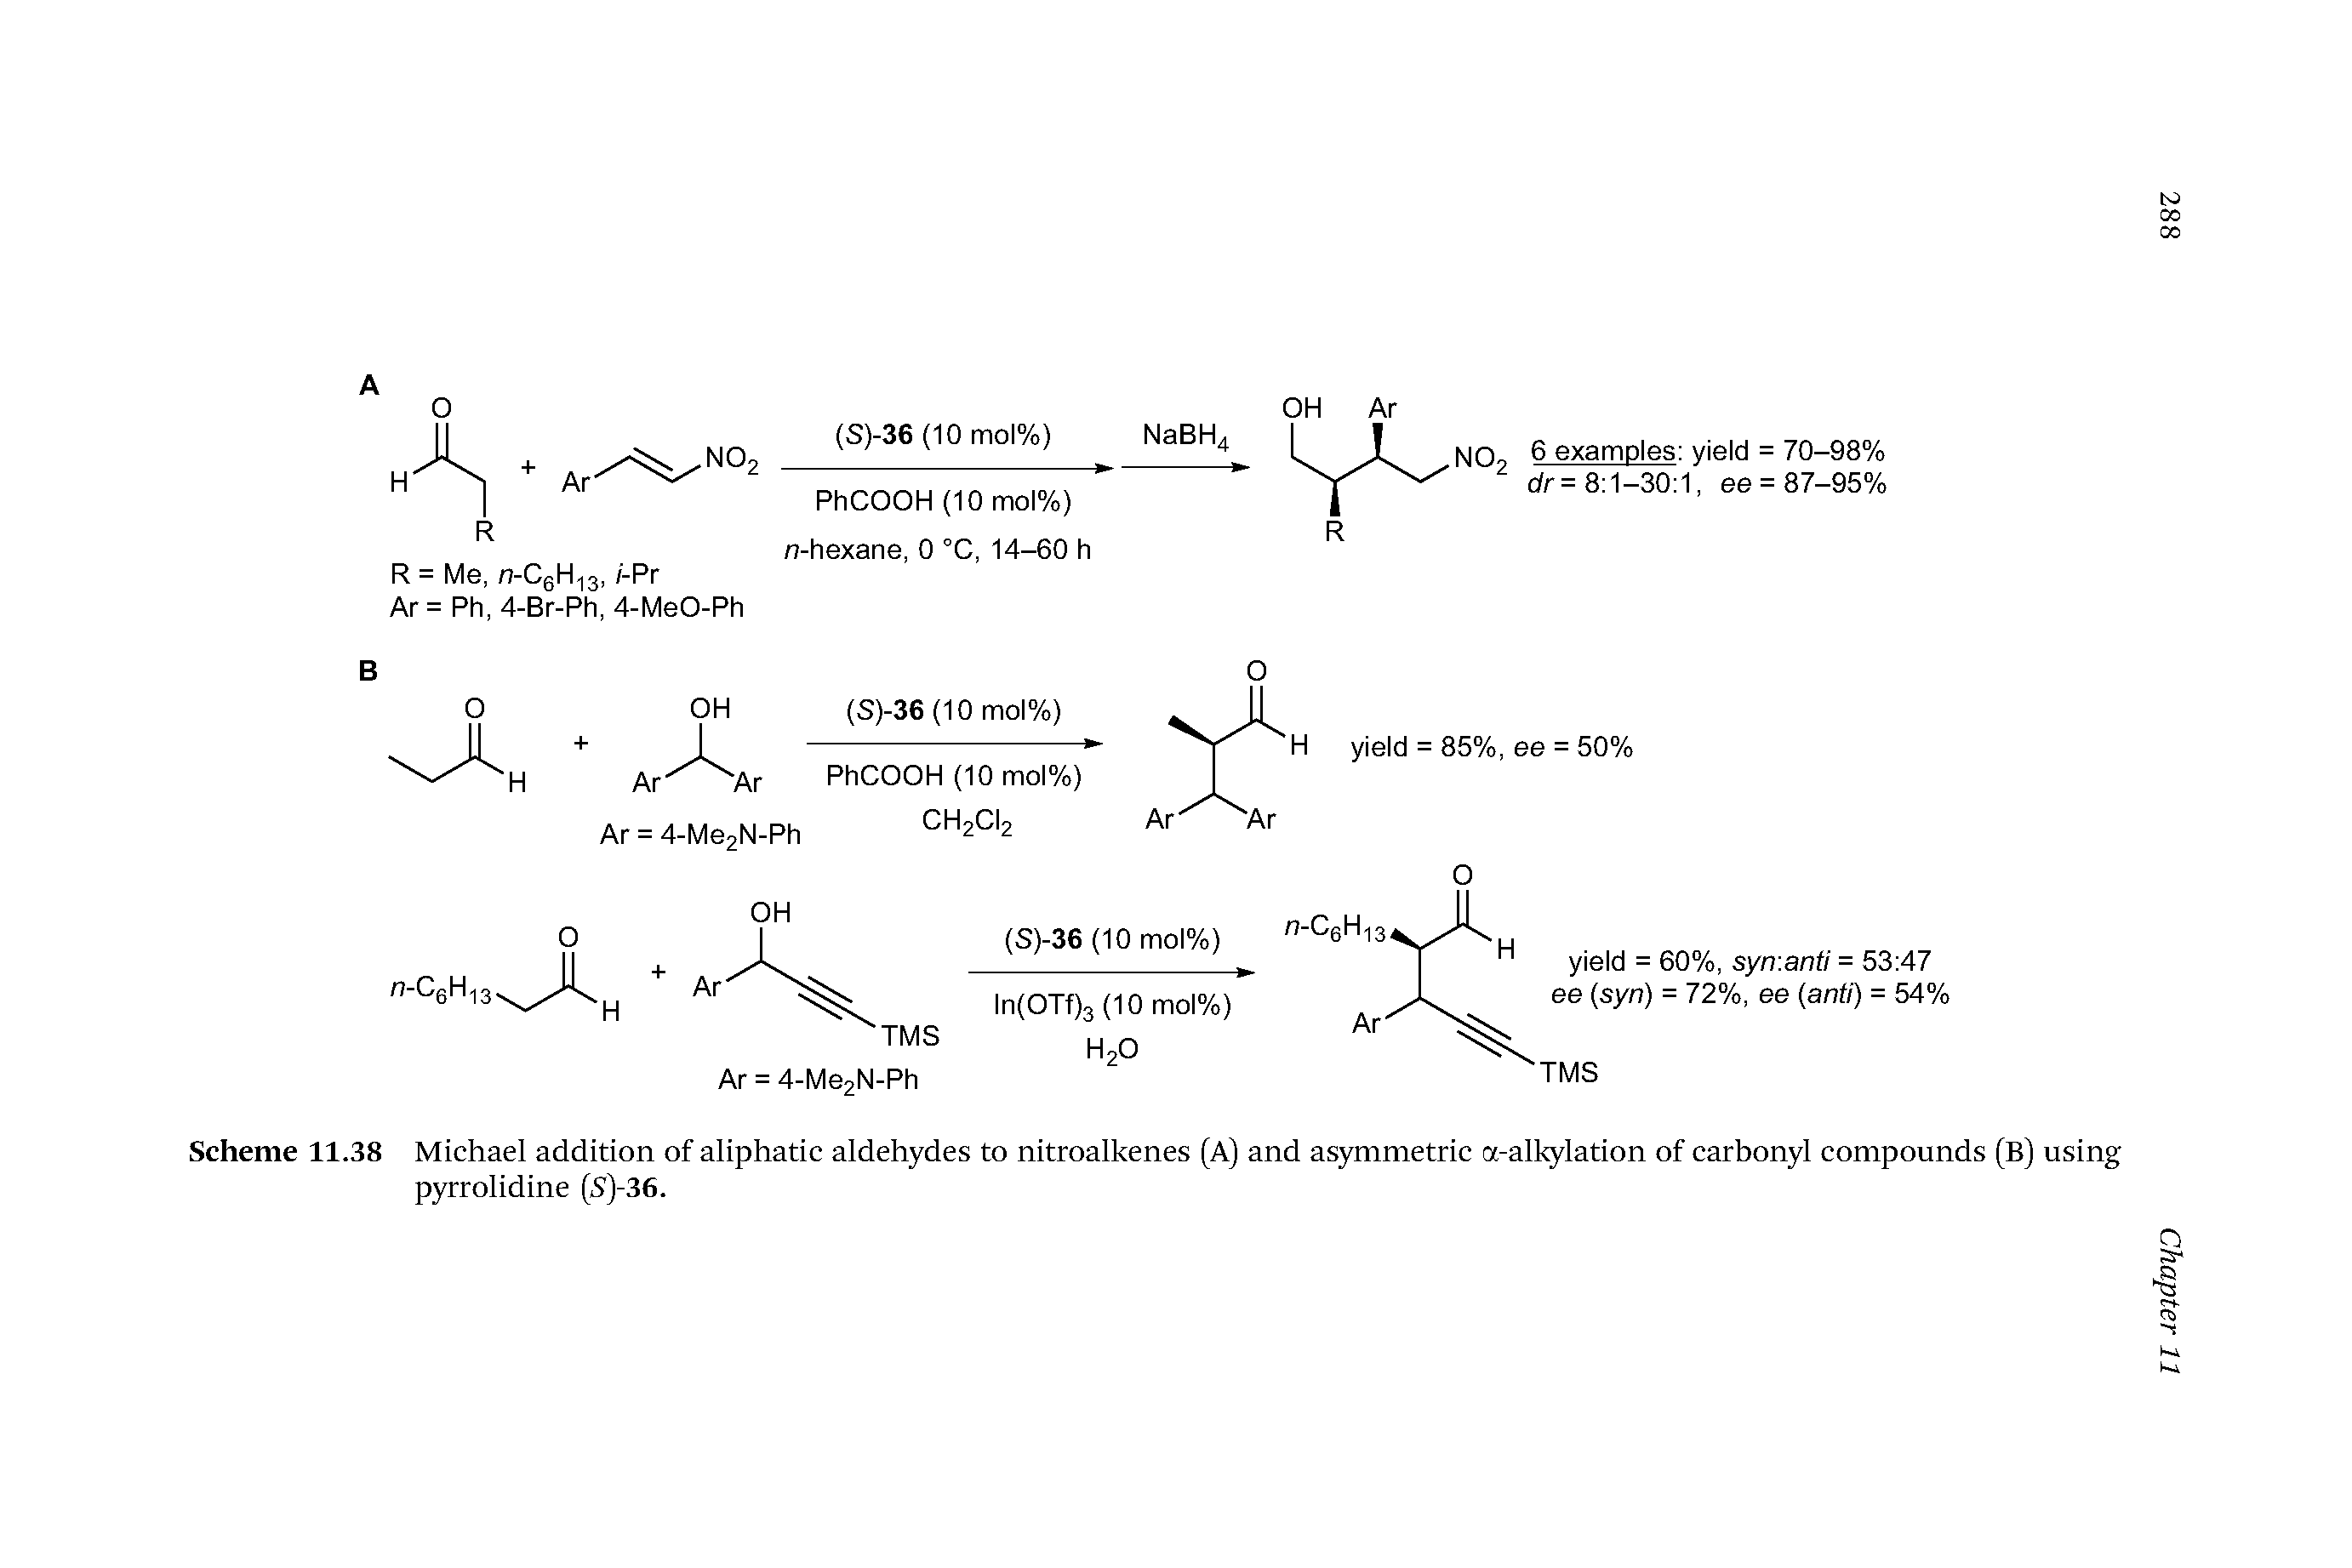 Scheme 11.38 Michael addition of aliphatic aldehydes to nitroalkenes (A) and asymmetric a-alkylation of carbonyl compounds (B) using pyrrolidine (S)-36.